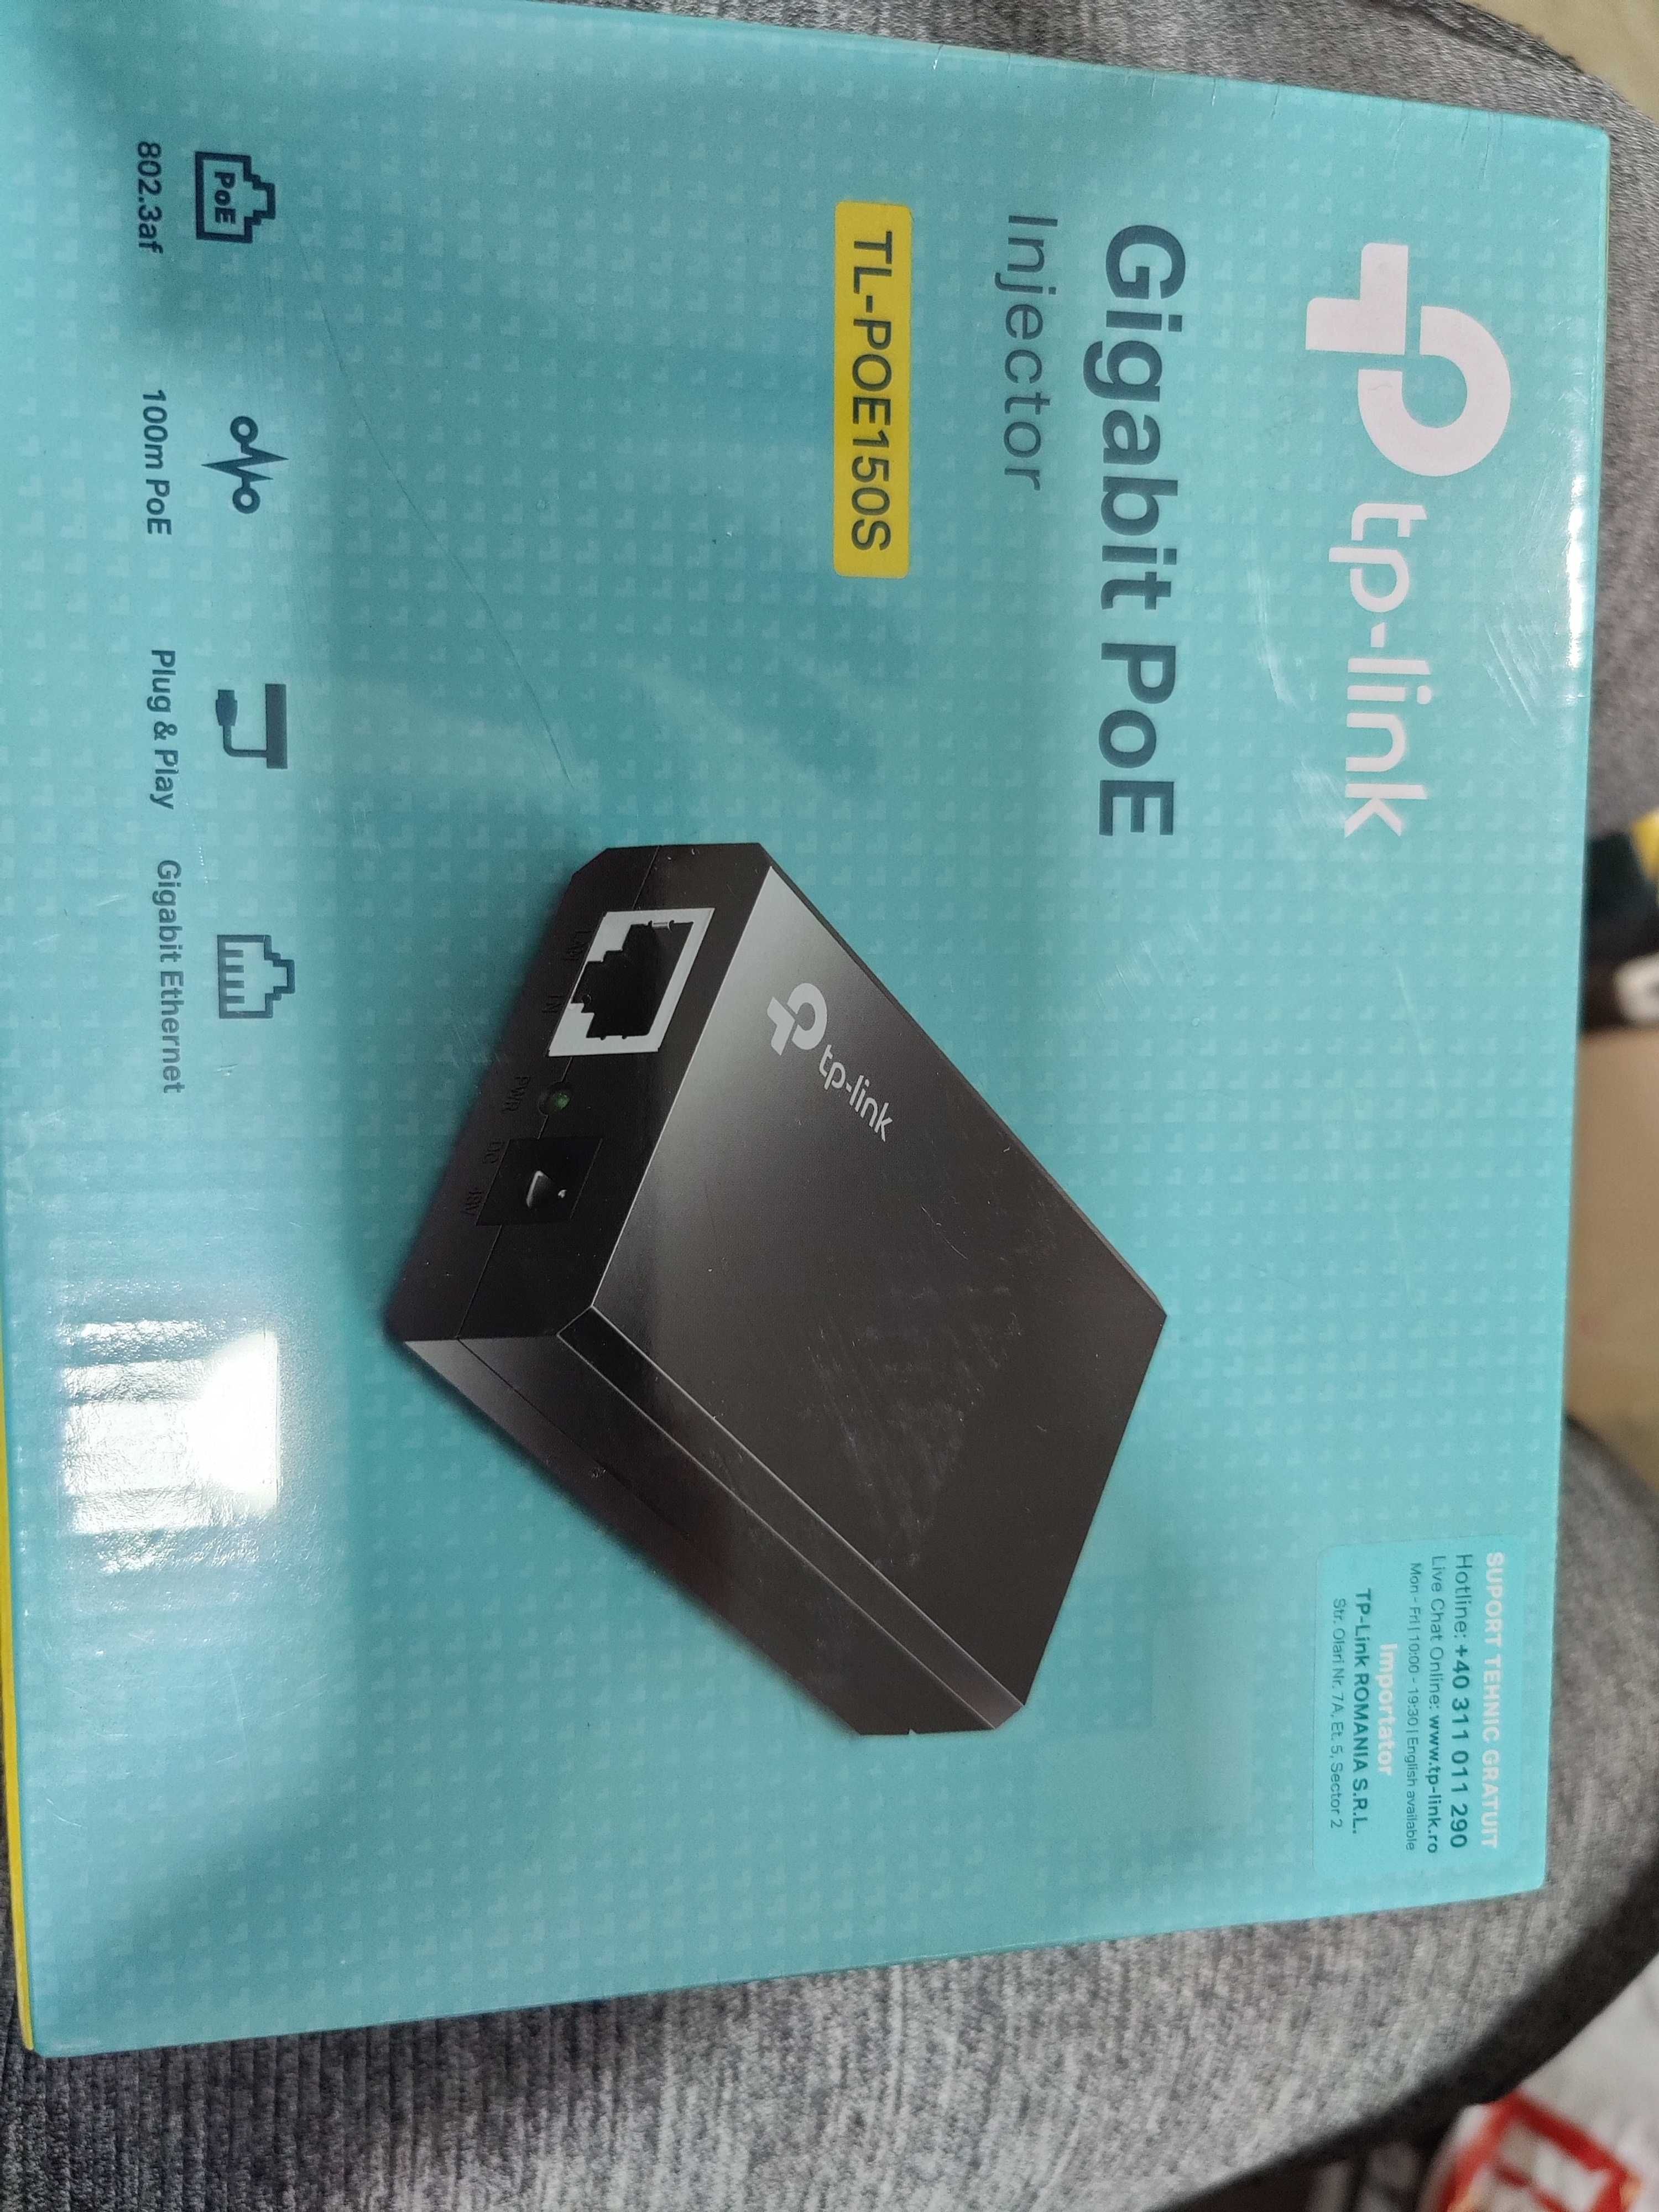 Injector tp-link